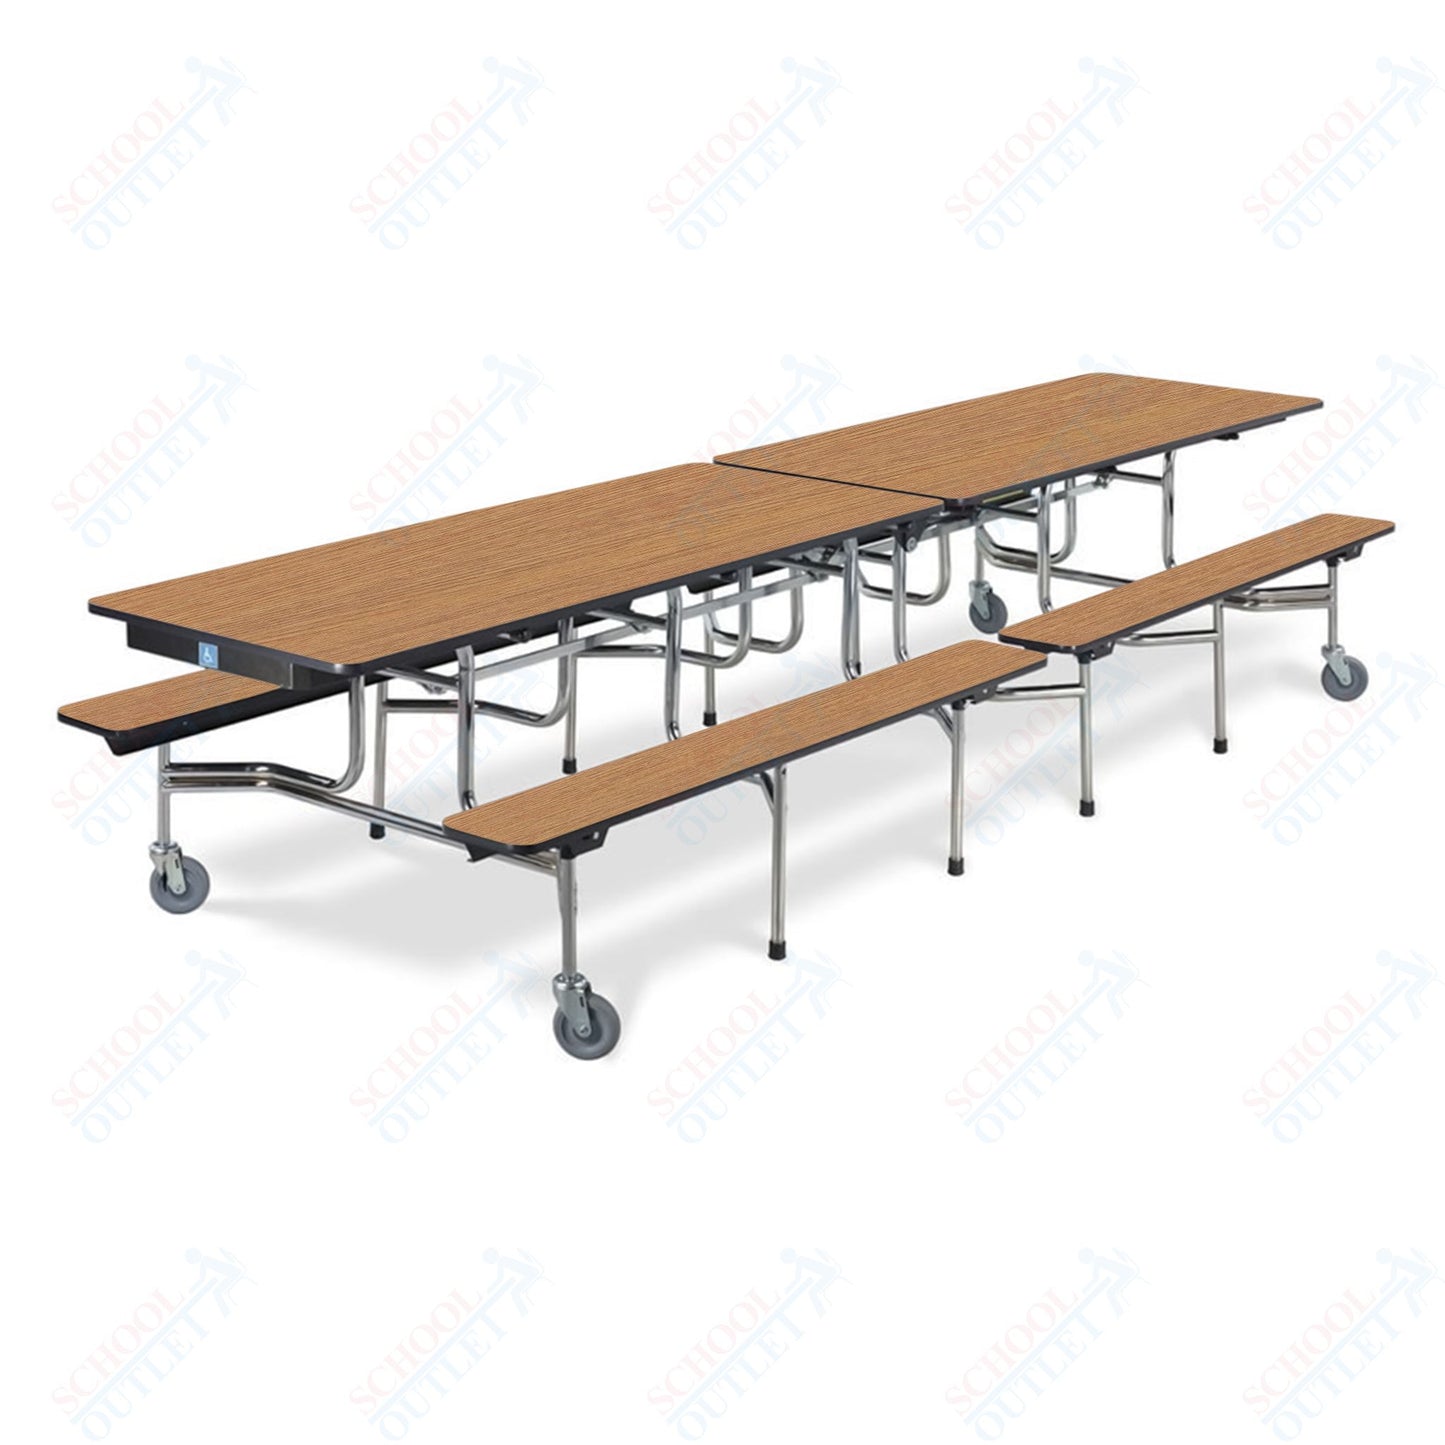 Virco MTB193110WAEB - ADA Compliant Rectangle Mobile Bench Cafeteria Table - Sure Edge - 19" Seat Height - 10.5'L - Seats 10 and 2 Wheelchair